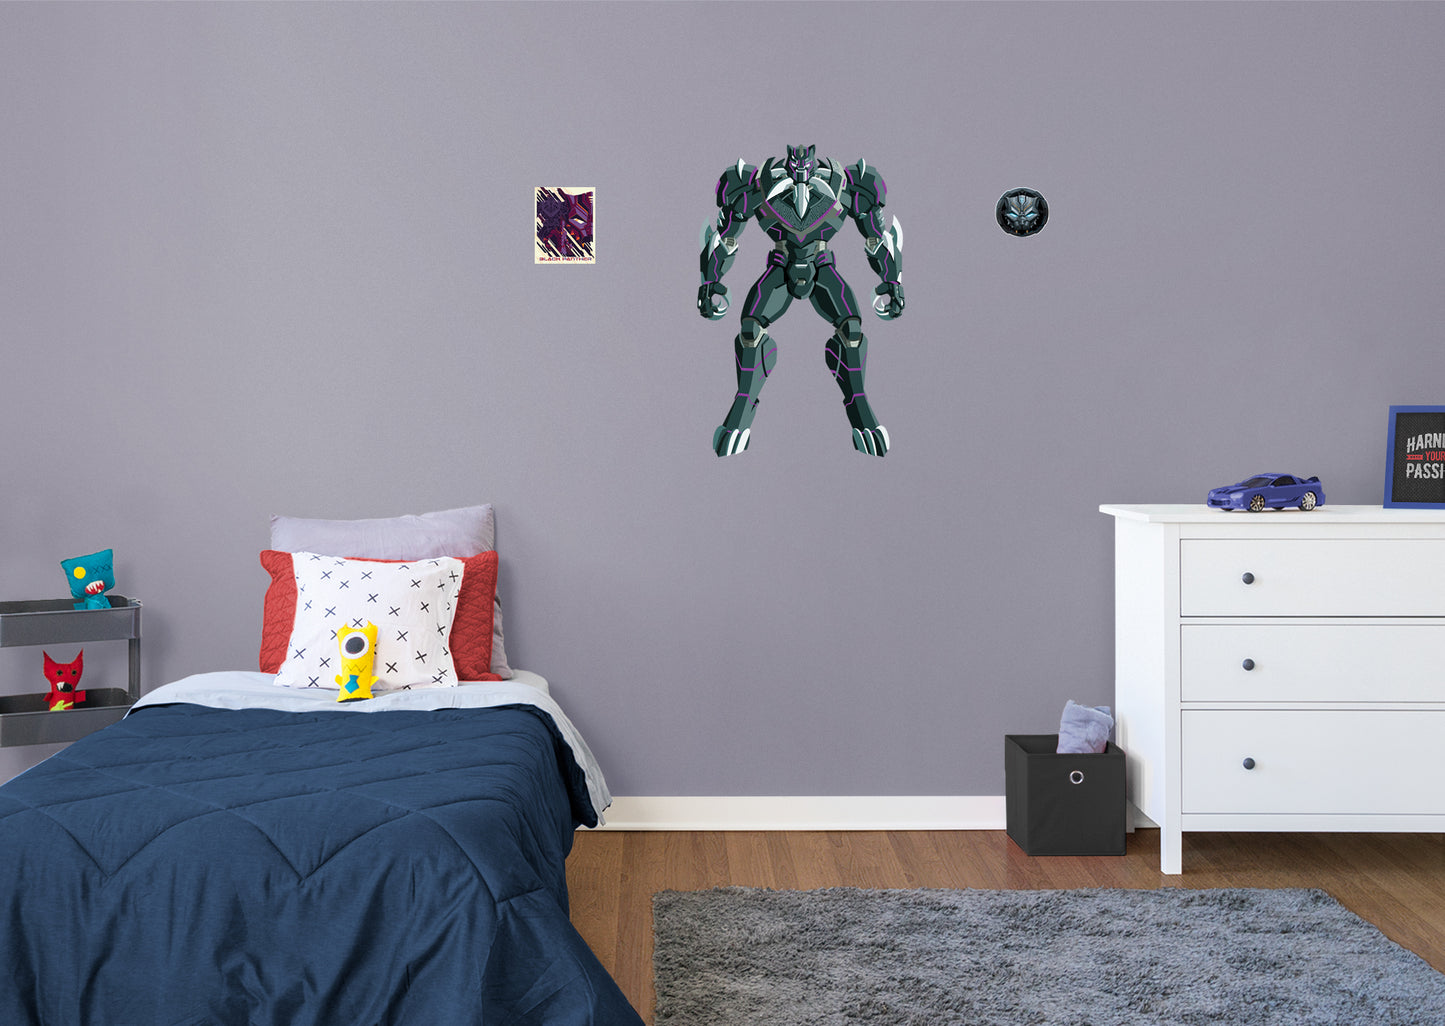 Avengers: Mech Strike: Black Panther RealBig        - Officially Licensed Marvel Removable Wall   Adhesive Decal